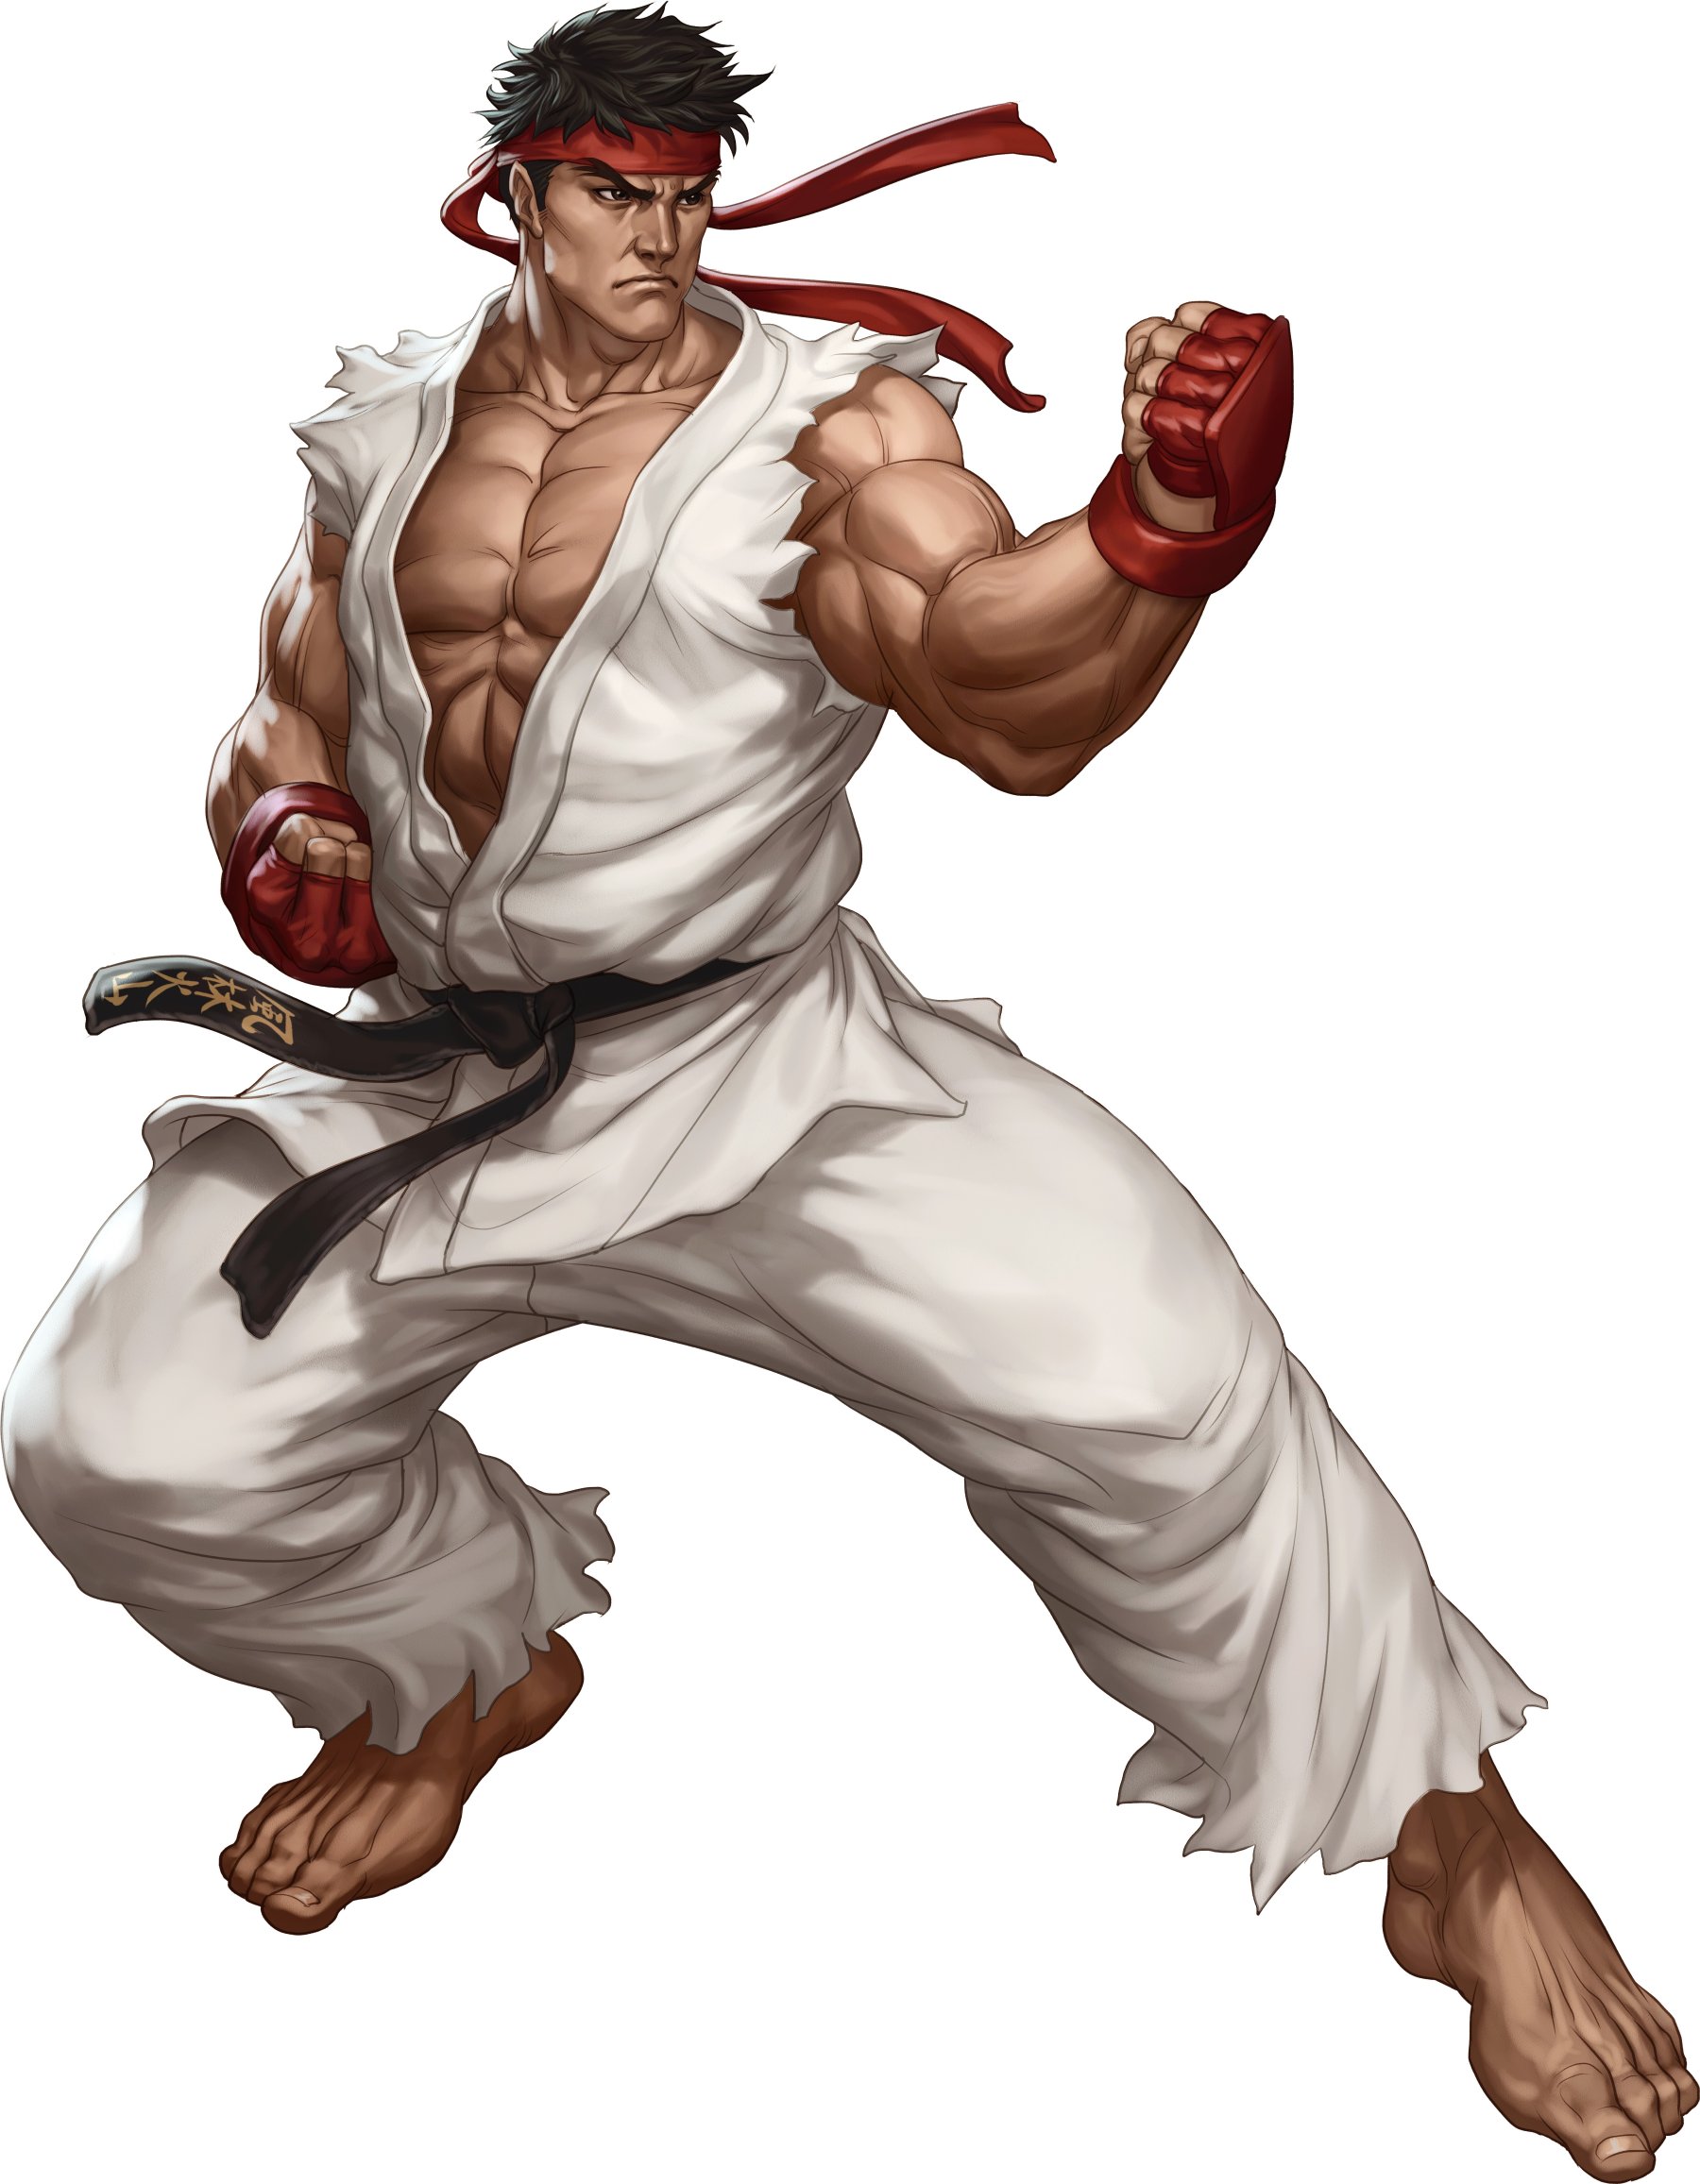 Xros Fighters/Ryu | Making the Crossover Wiki | FANDOM powered by Wikia